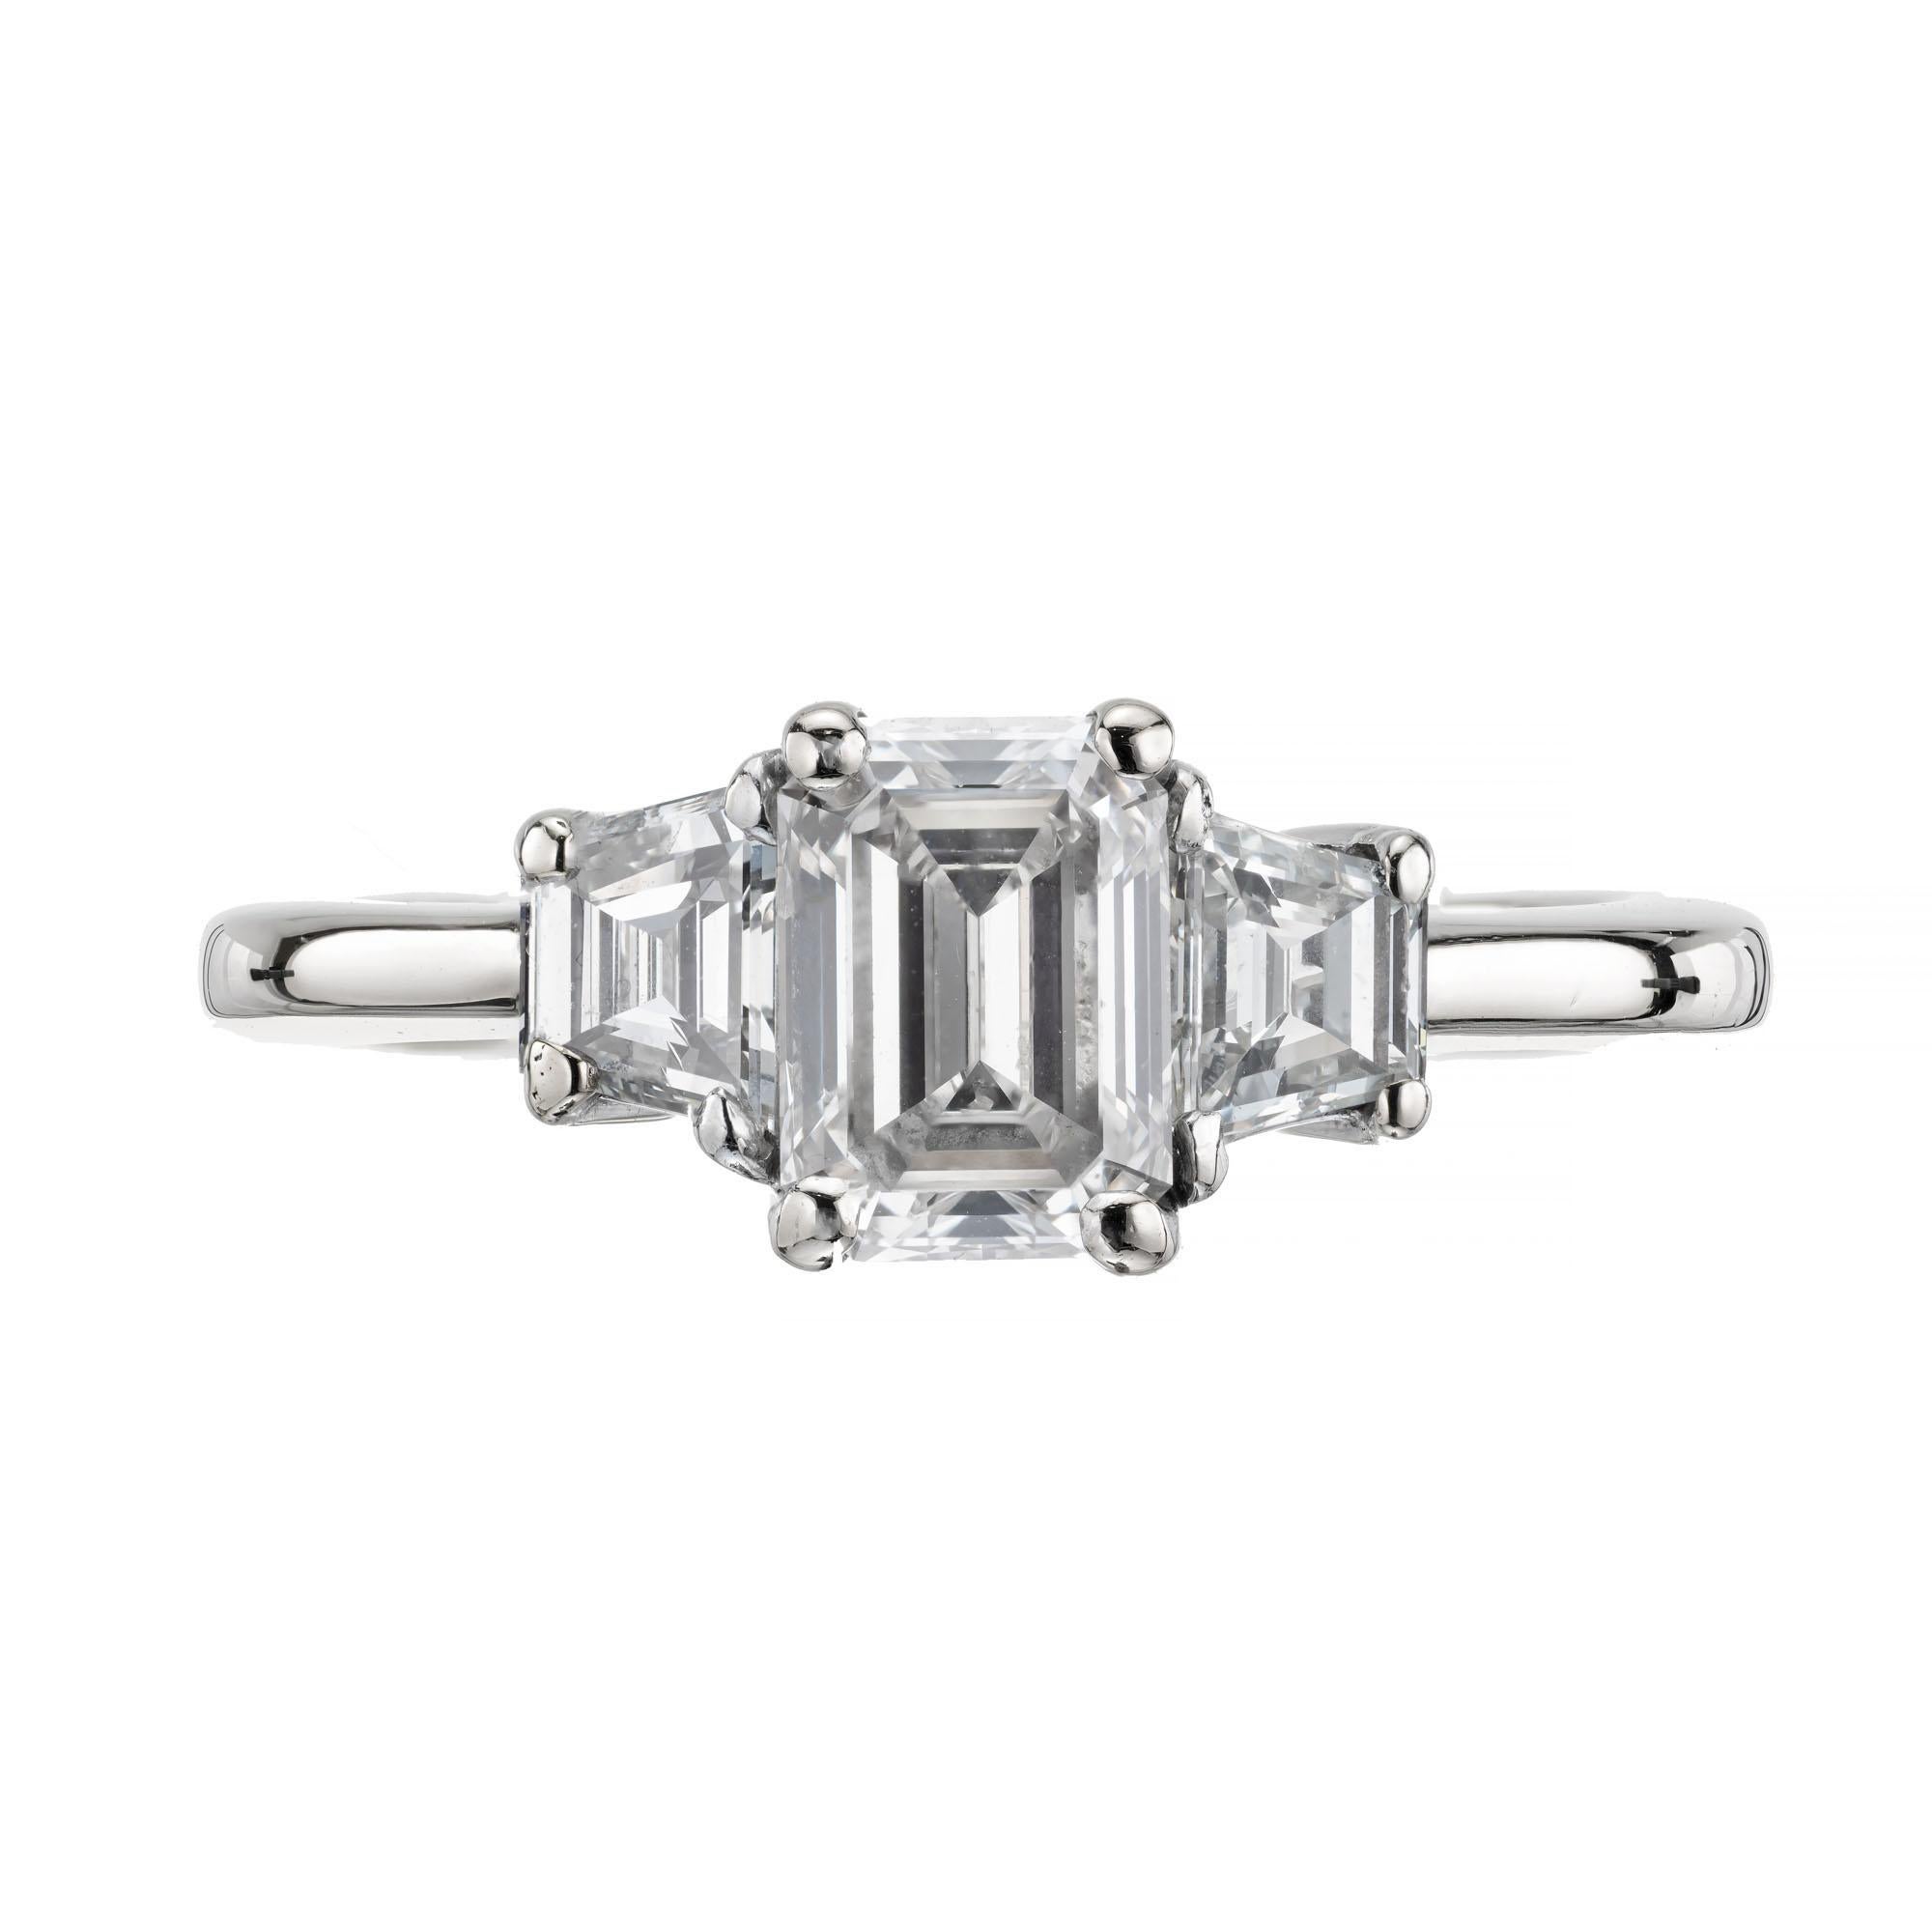 1.02 carat emerald cut diamond three-stone engagement ring. GIA certified emerald trapezoid cut center stone with 2 trapezoid side diamonds in a 18k white gold setting. 

1 emerald trapezoid cut diamond J VS2, approx. 1.02cts GIA Certificate #